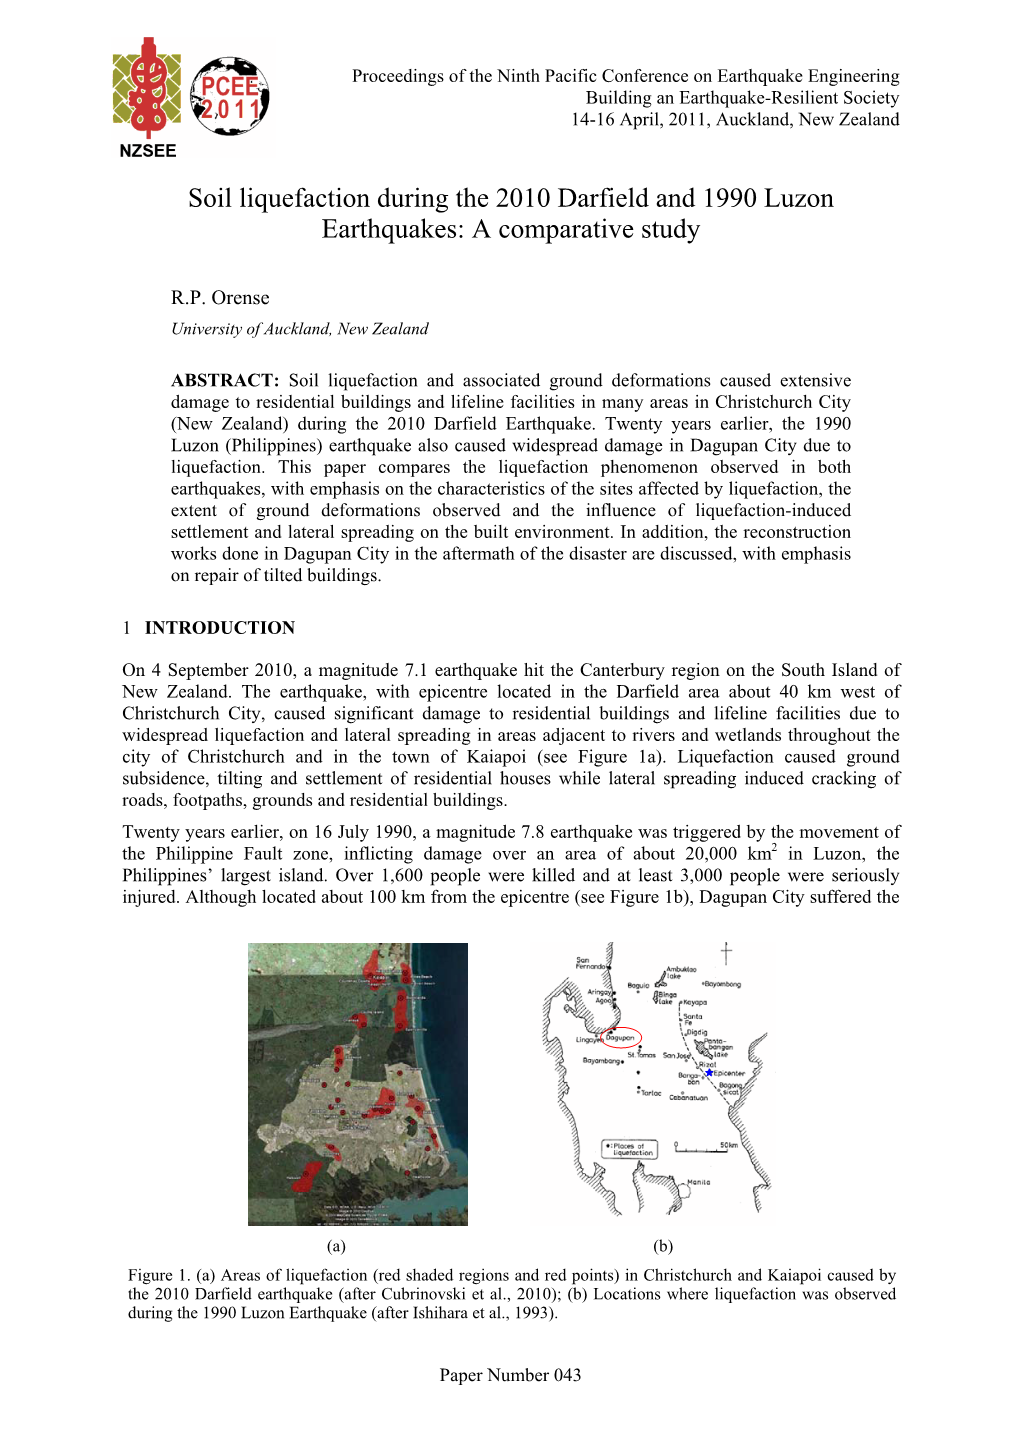 Soil Liquefaction During the 2010 Darfield and 1990 Luzon Earthquakes: a Comparative Study